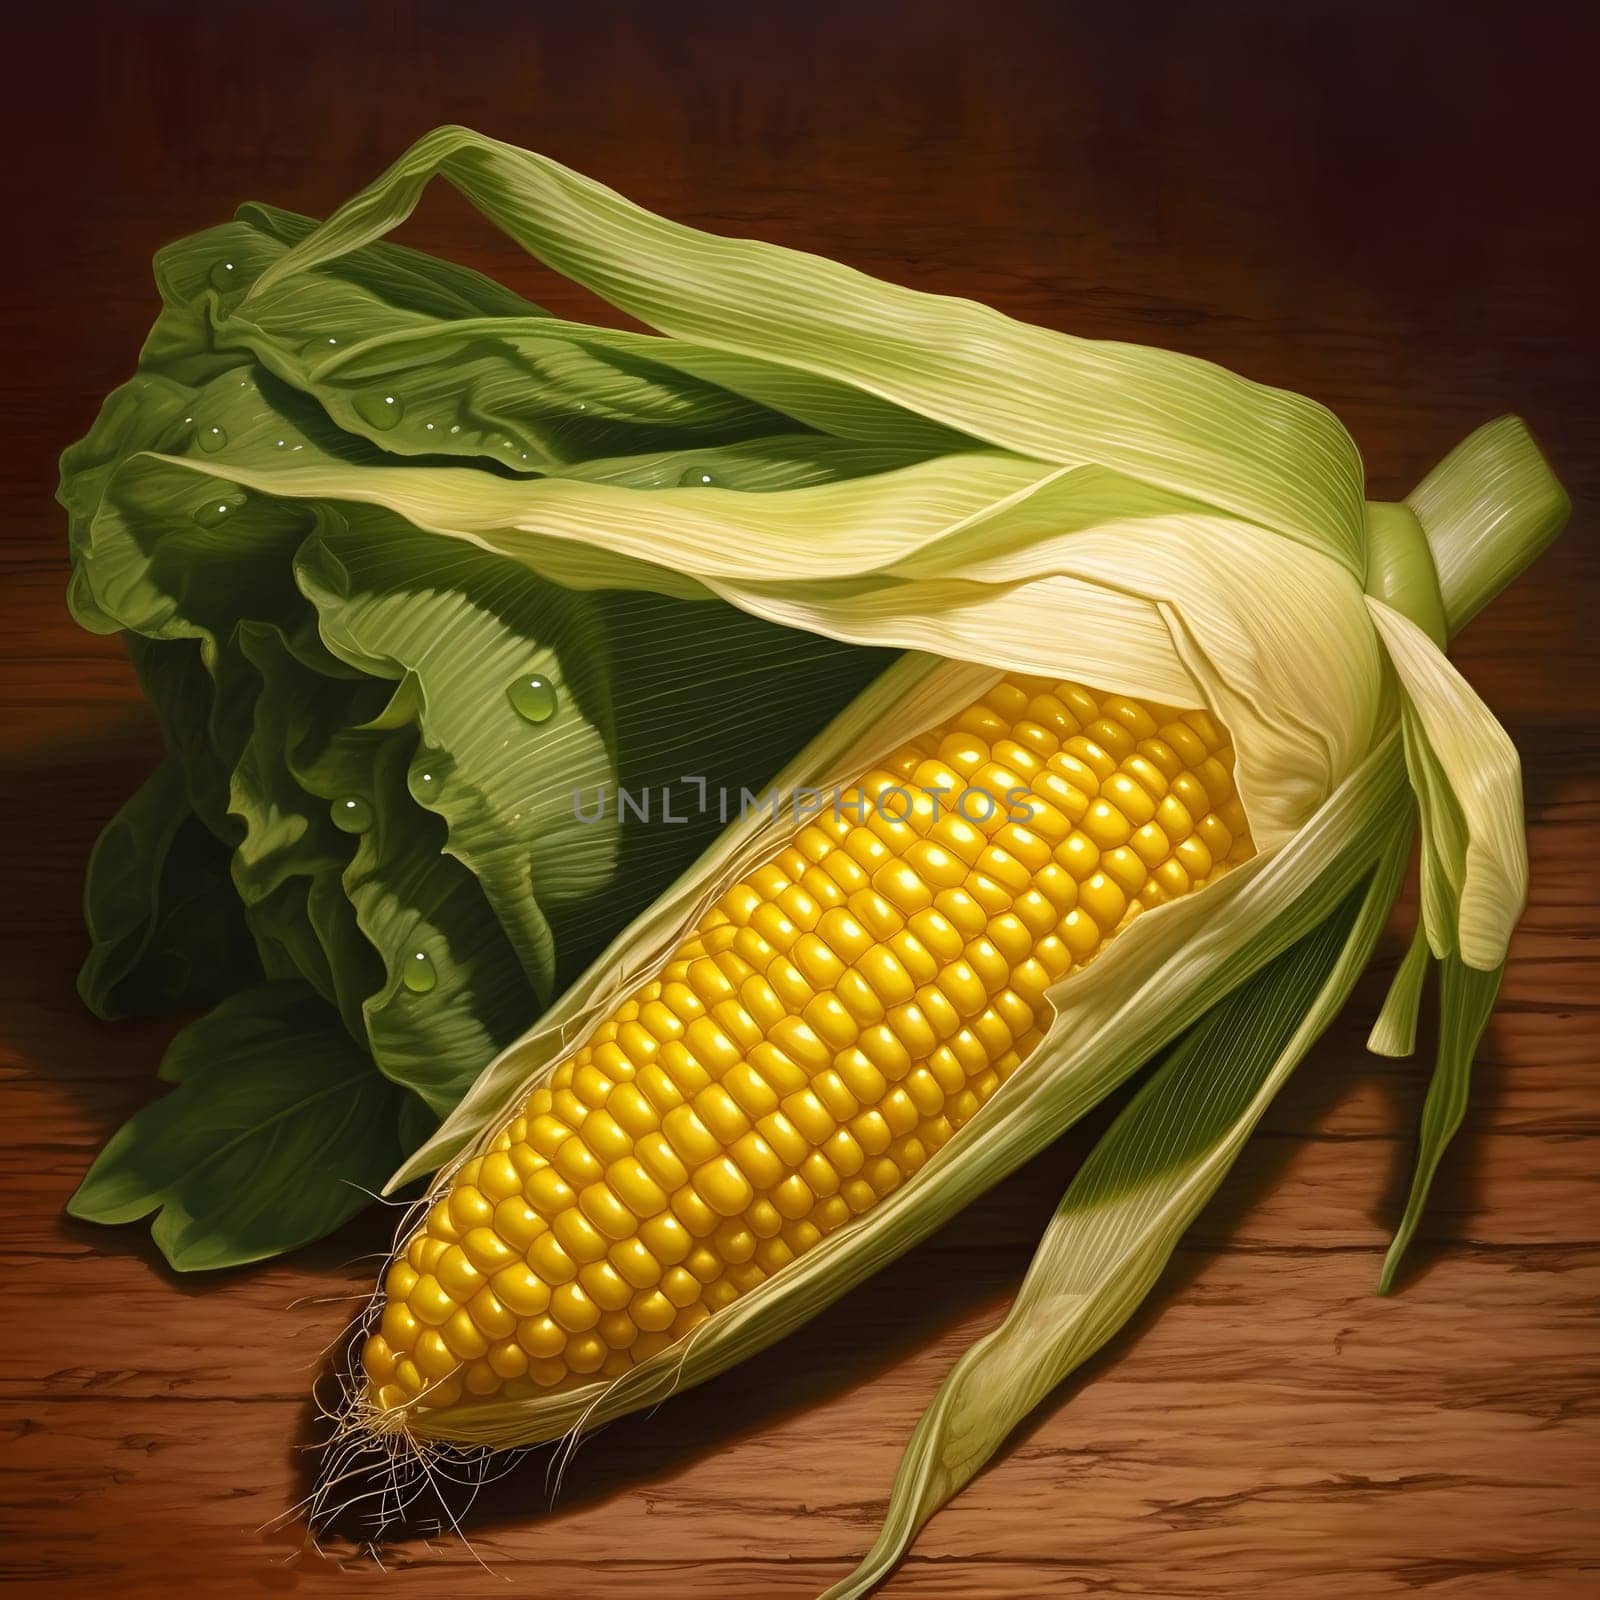 Yellow corn cob in green leaf on wooden board. Corn as a dish of thanksgiving for the harvest. An atmosphere of joy and celebration.